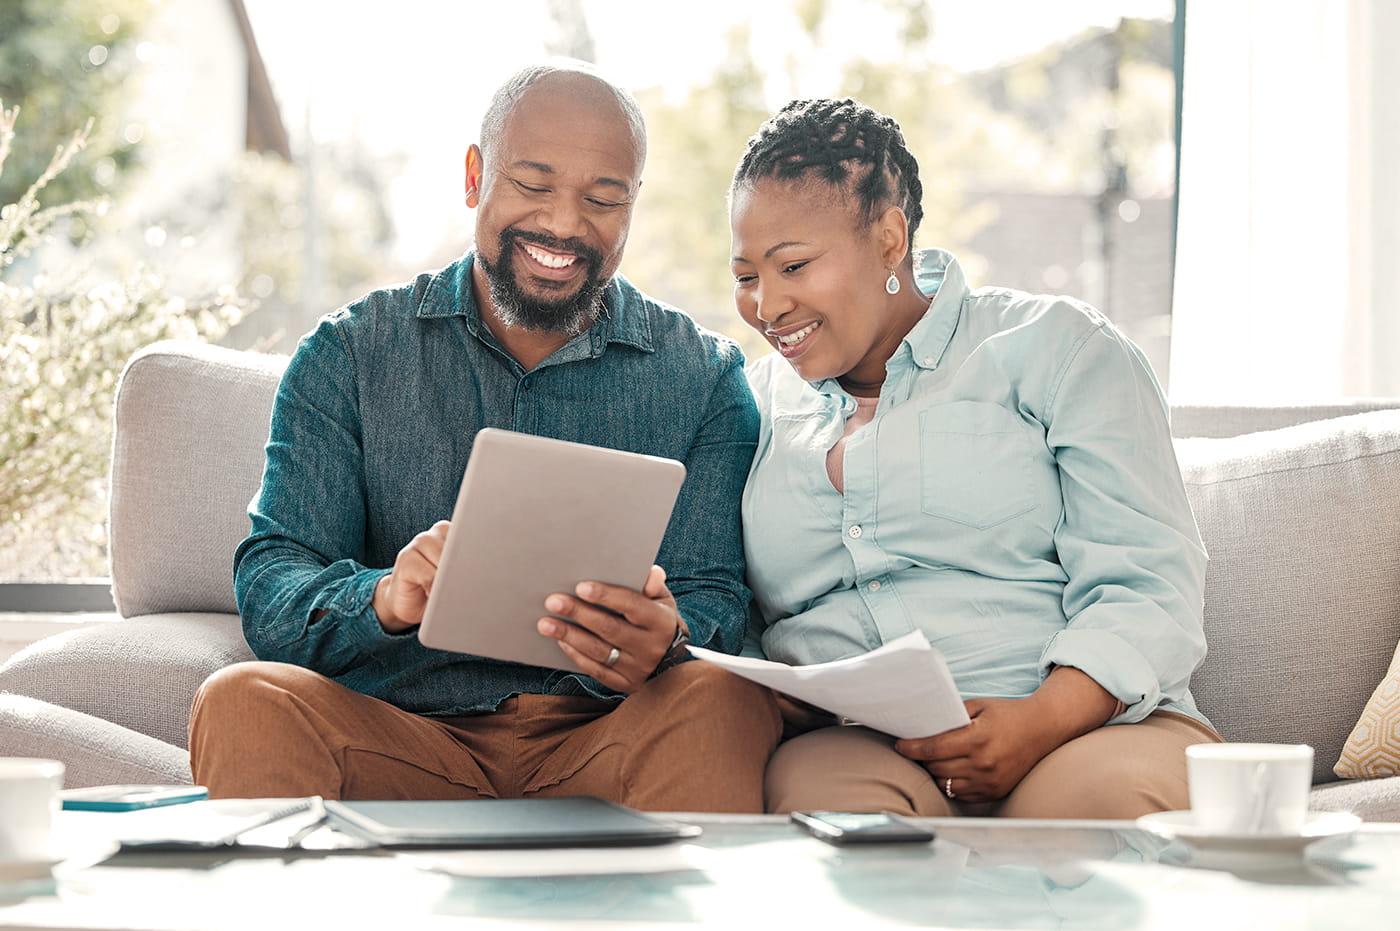 Smiling couple sitting on a couch with an iPad and papers. 